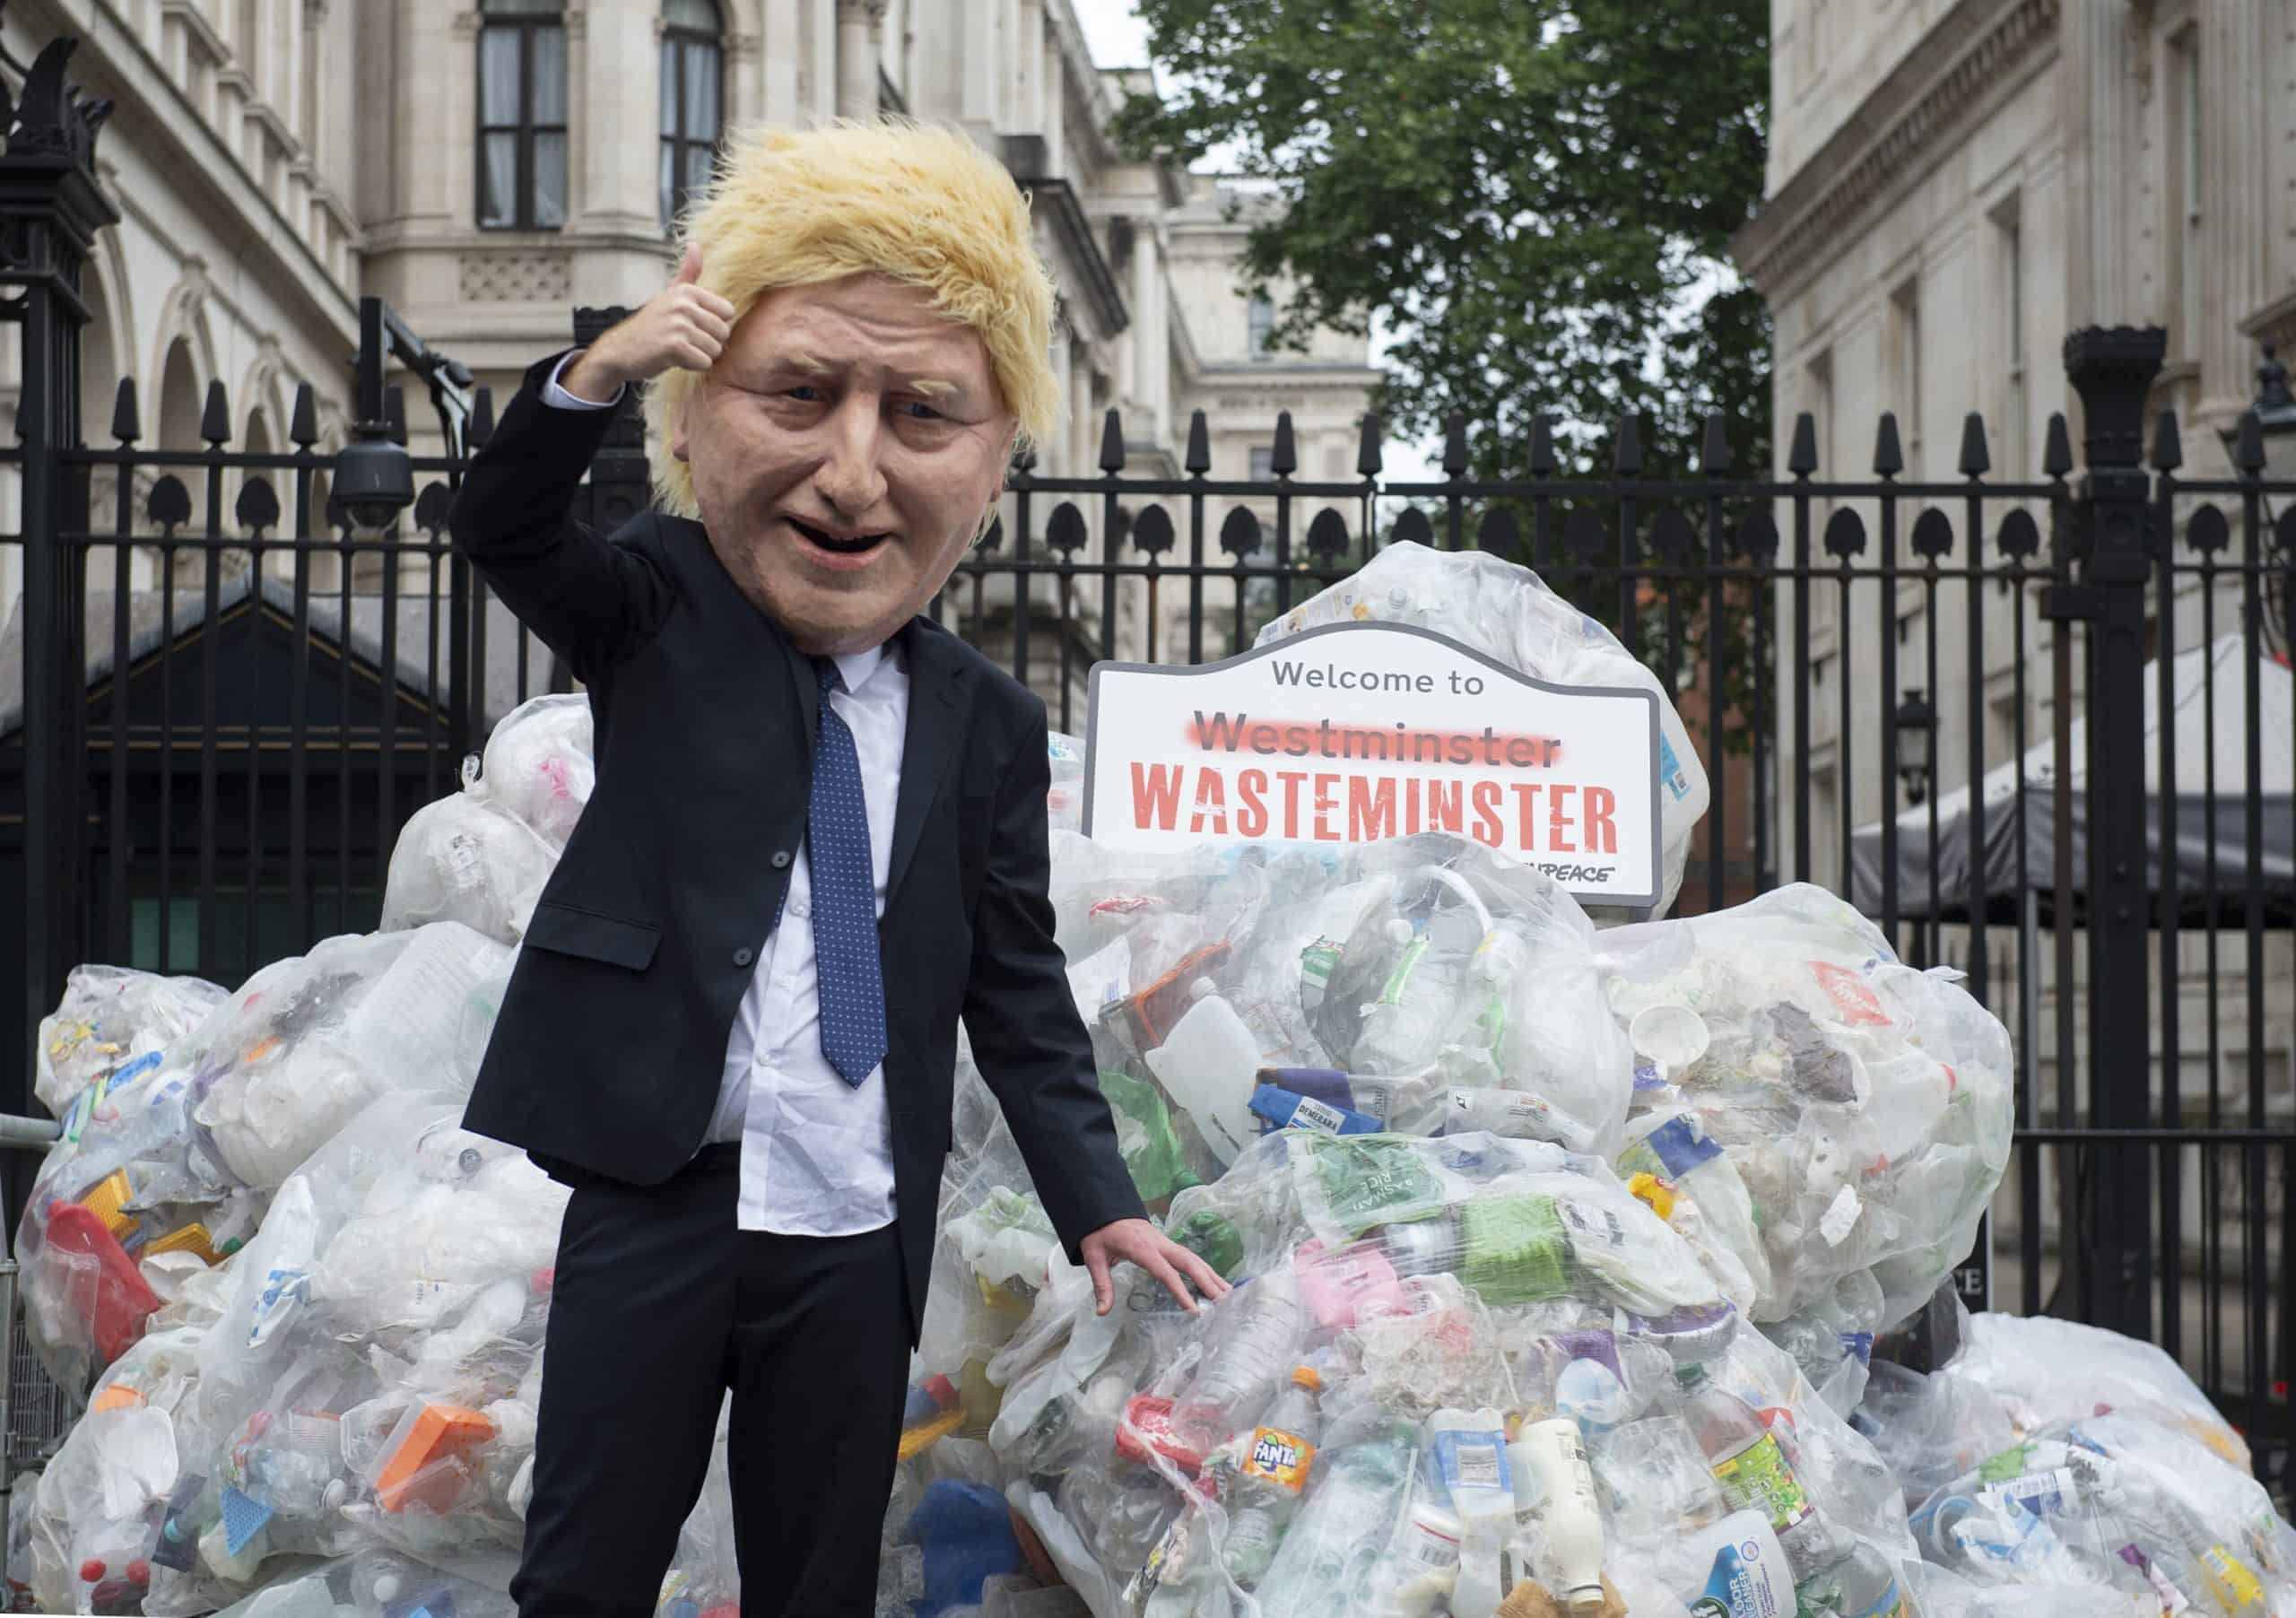 ‘Wasteminster’: Greenpeace dumps rubbish outside Downing Street in plastics protest